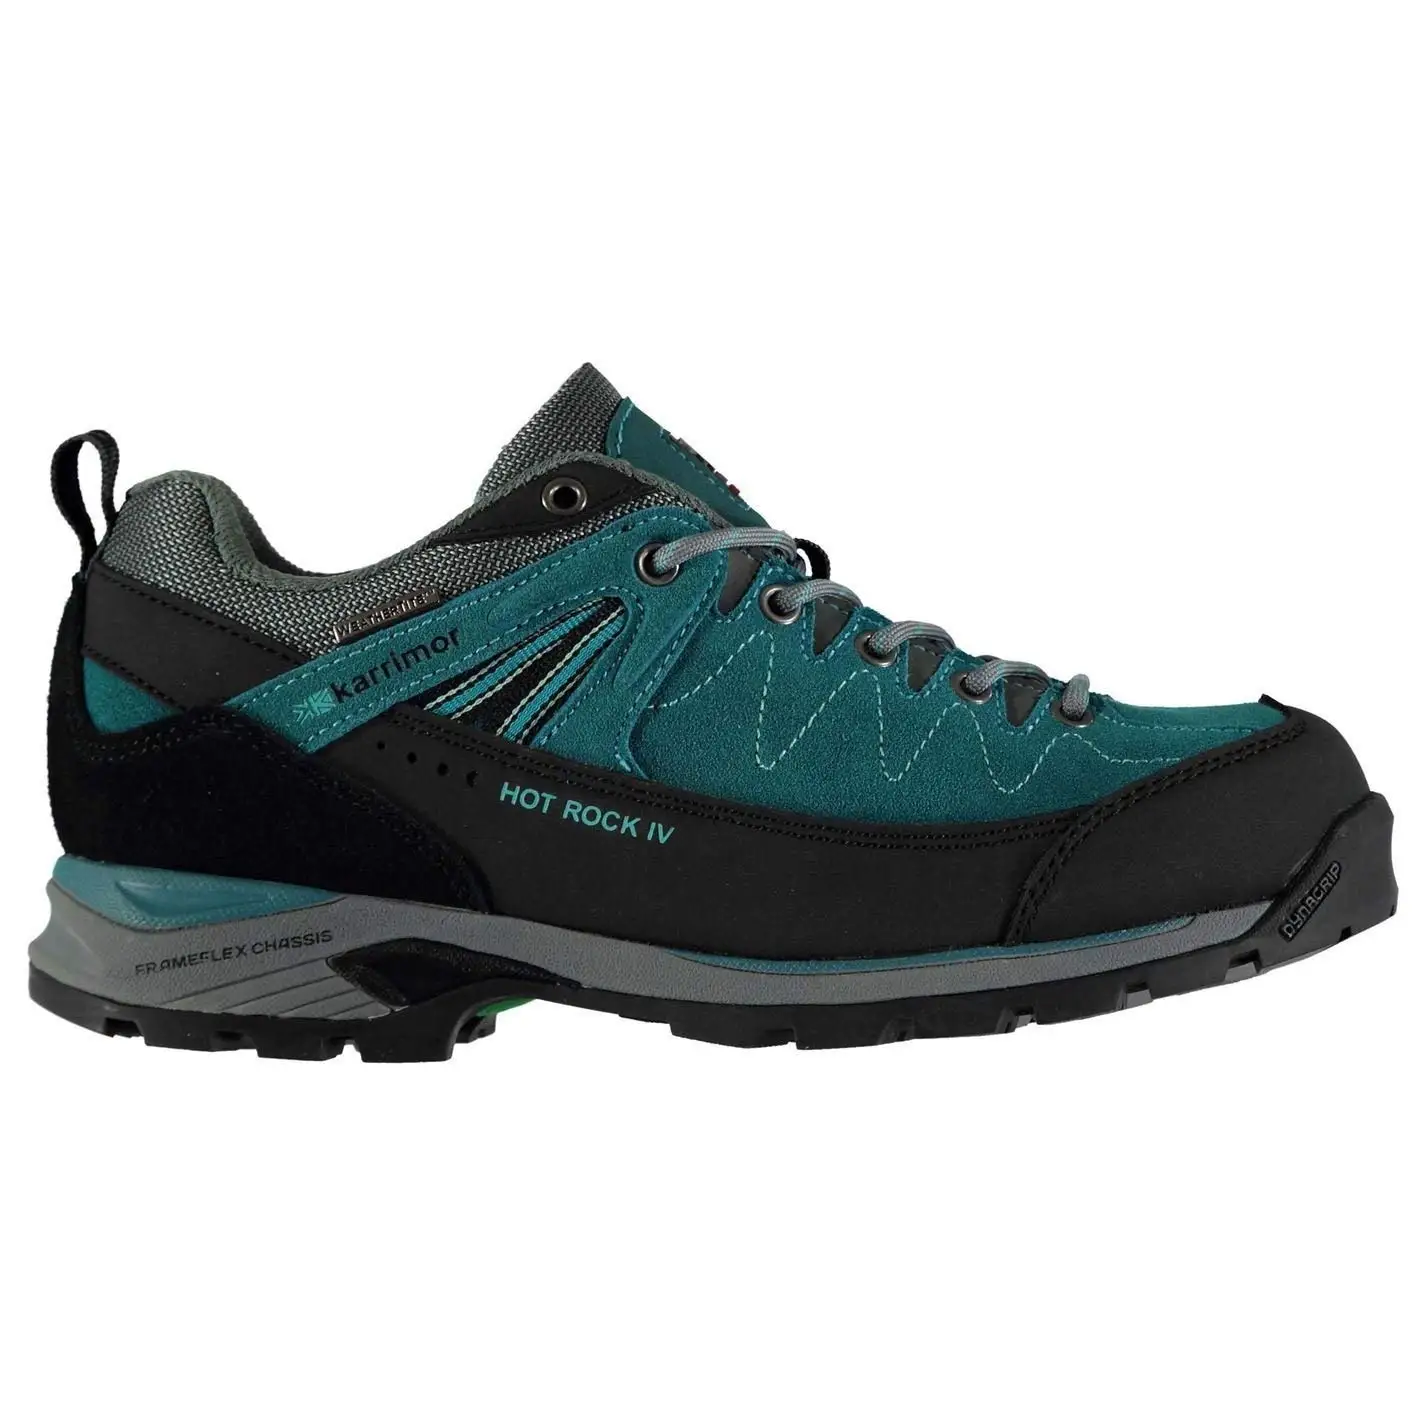 Cheap Karrimor Safety Shoes, find 